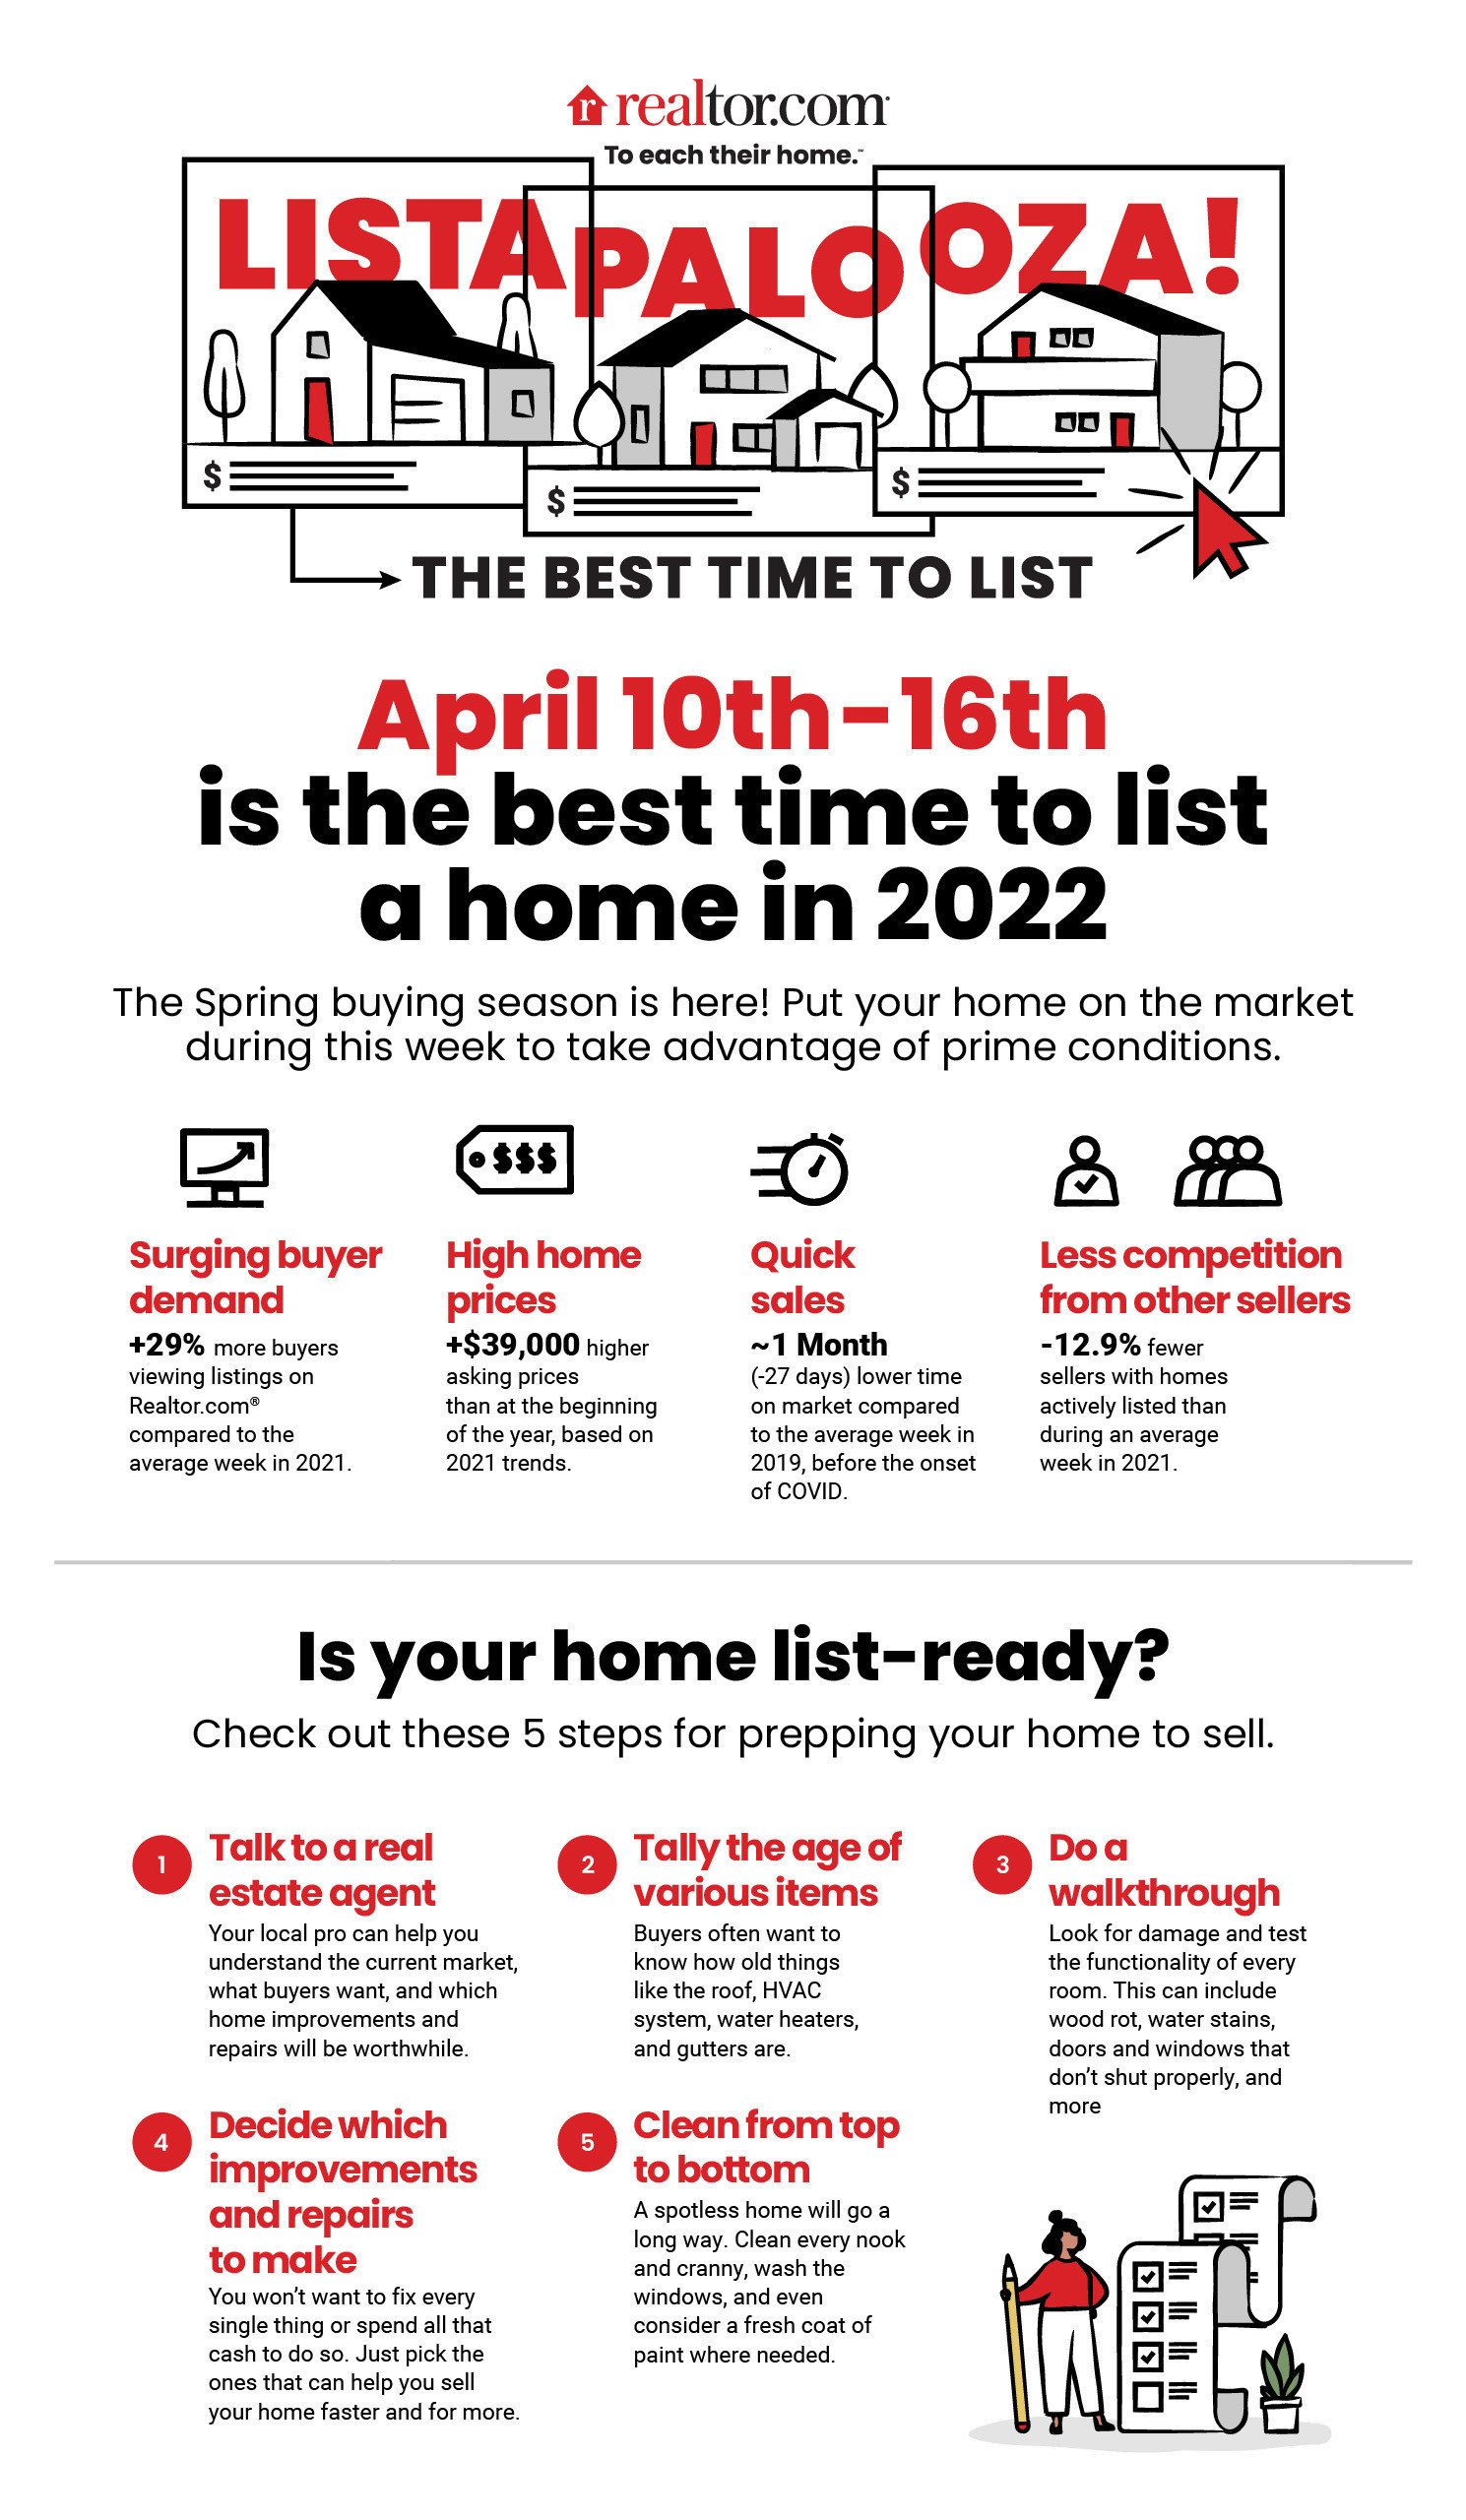 An infographic showing why the week of April 10 is the best time for listing a home.